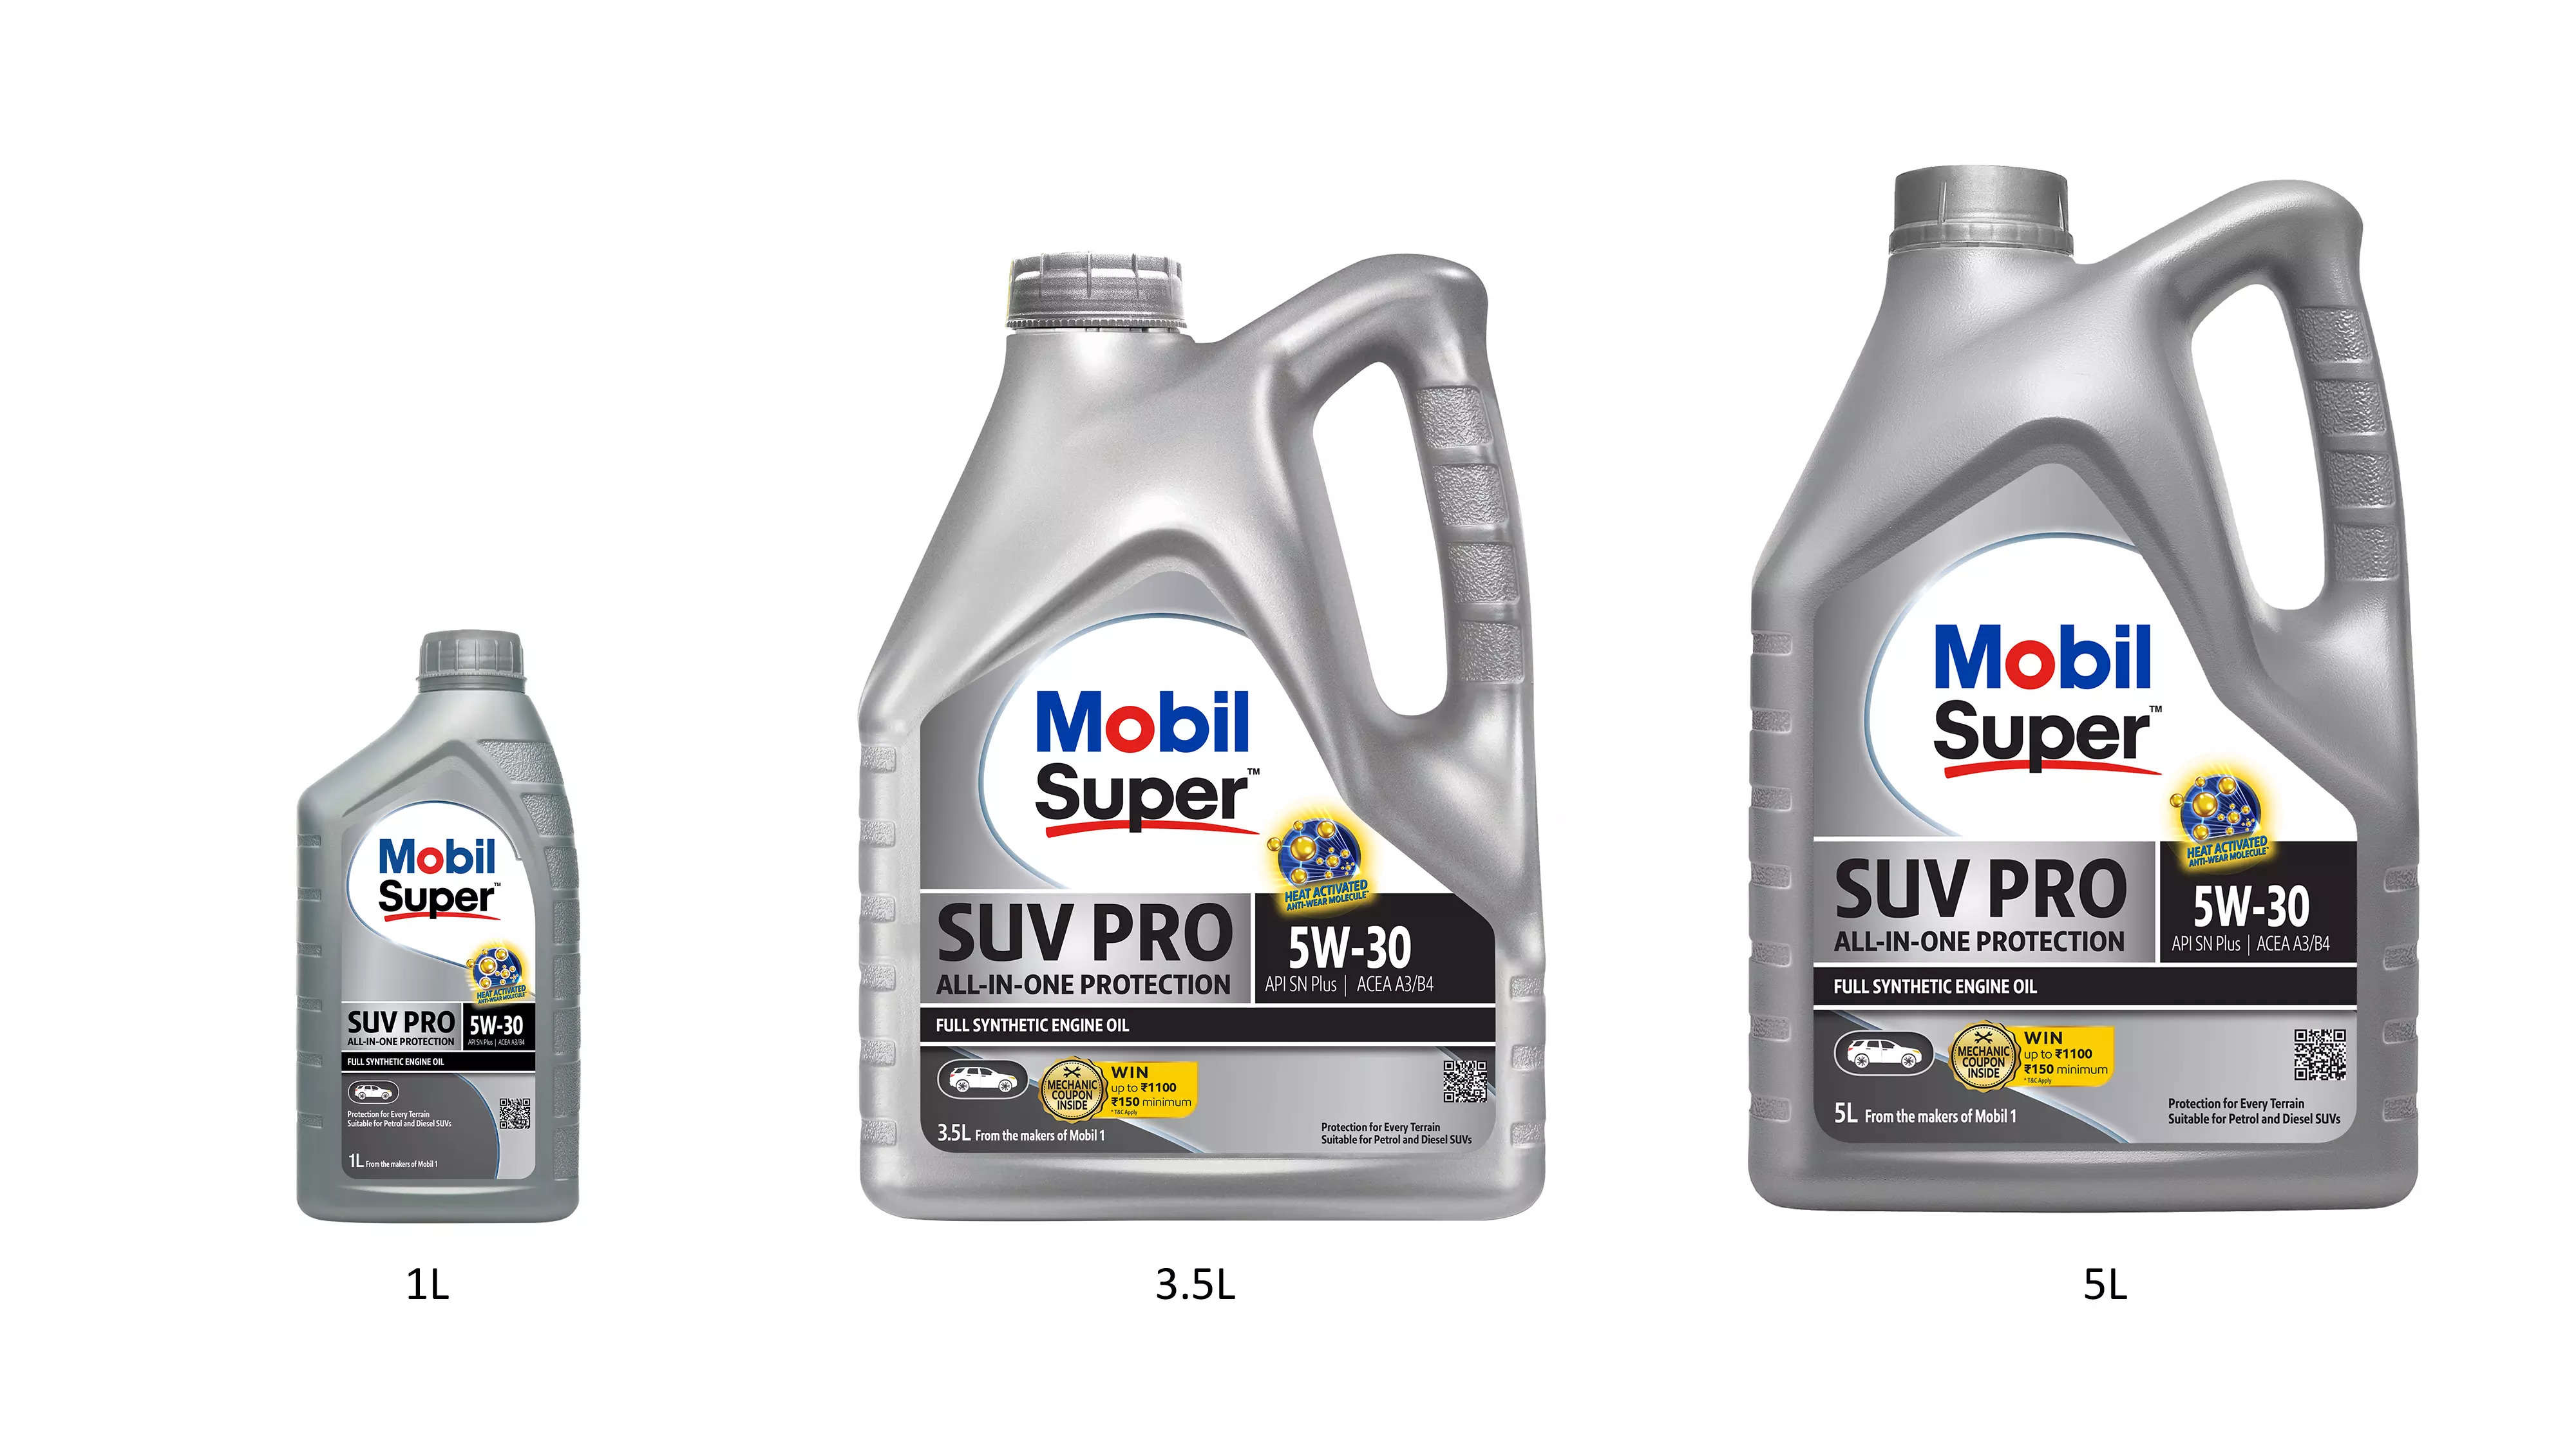  According to the company, the full synthetic Mobil SuperTM SUV Pro delivers 79% better engine wear protection, low speed Pre-ignition protection, and heat activated anti-wear protection.